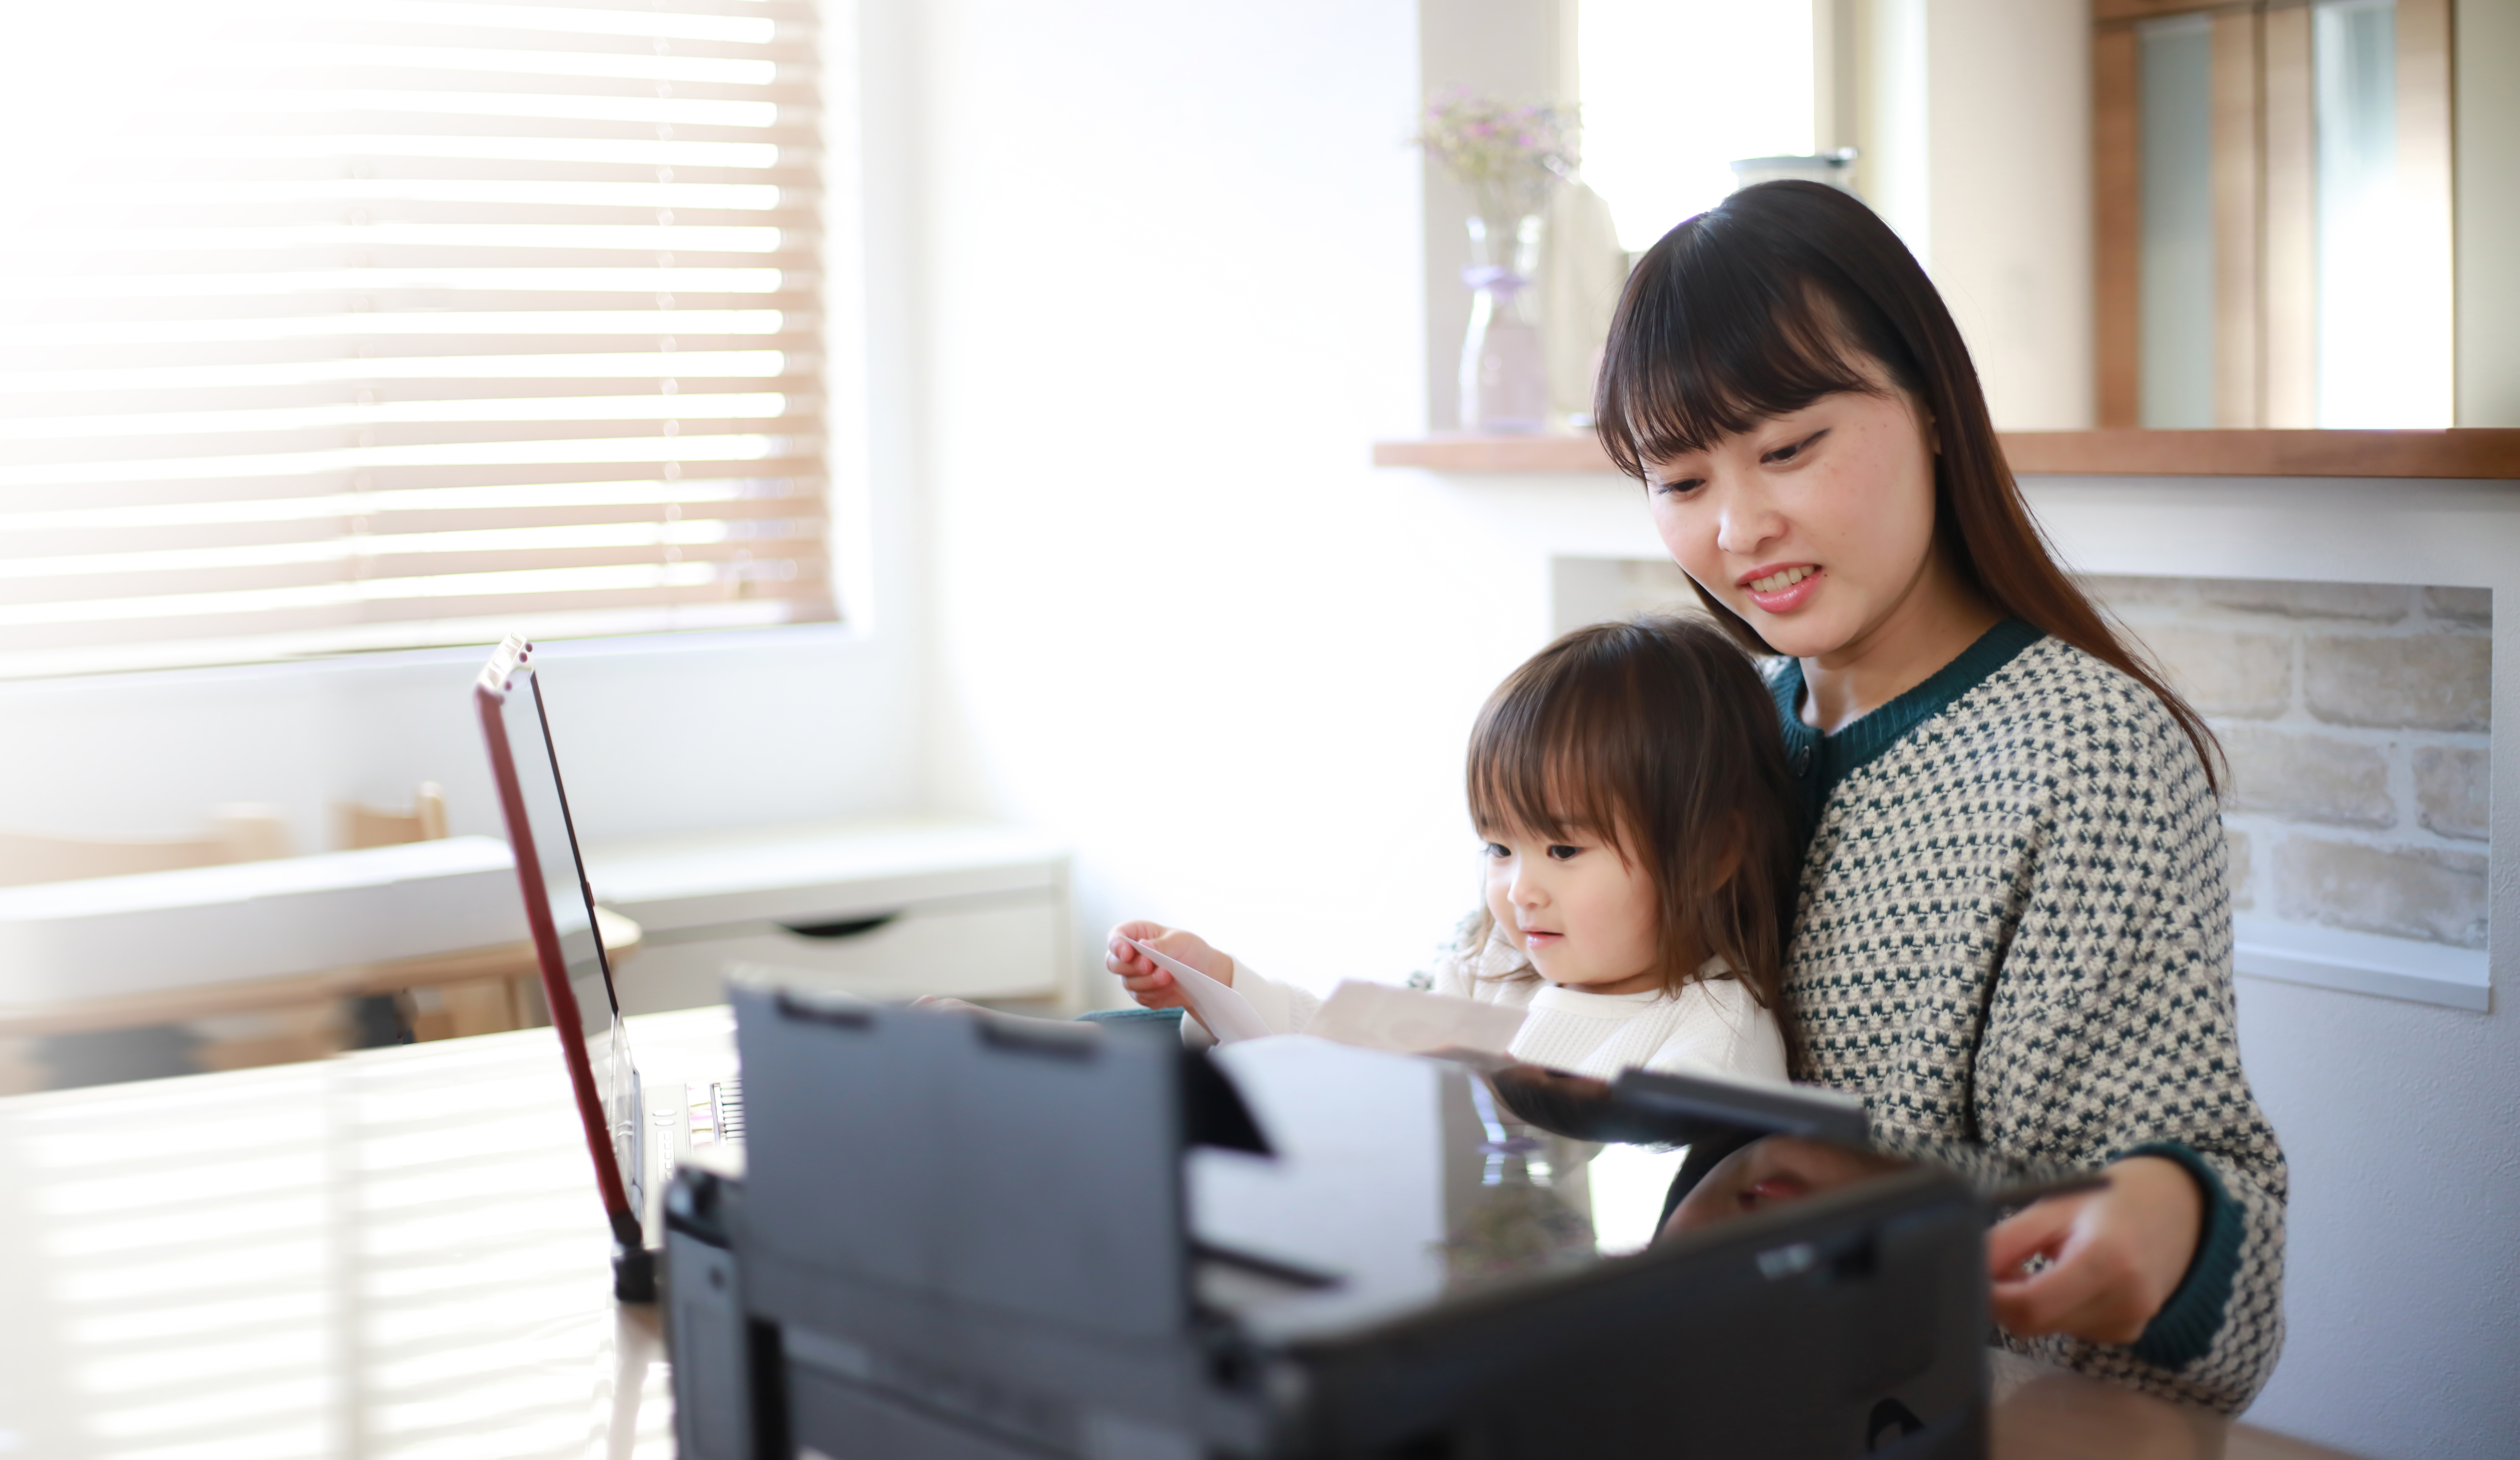 mom and daughter in home office room with printer